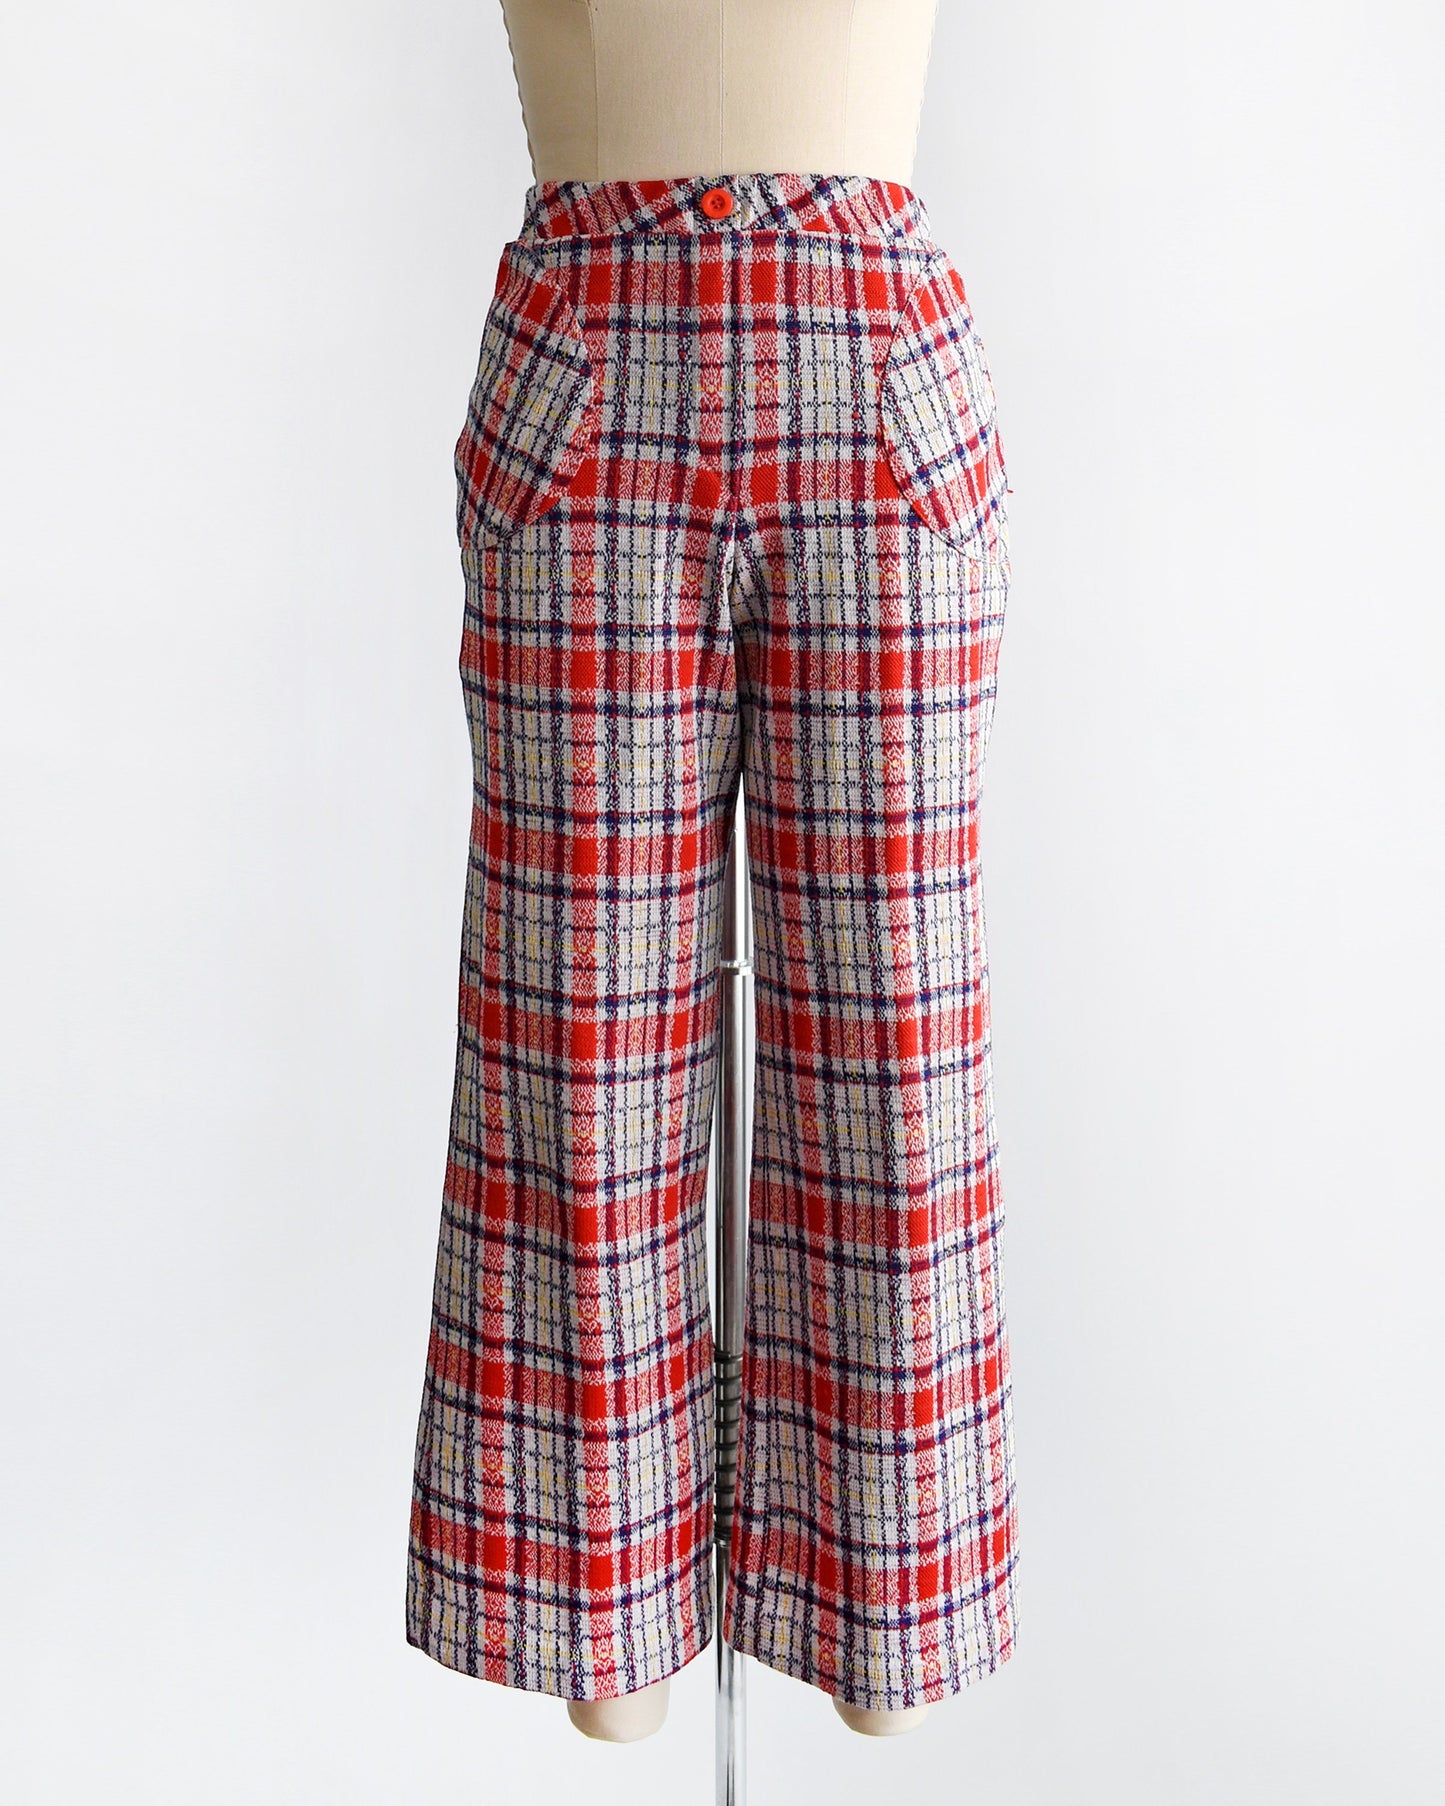 A vintage pair of 70s red white and blue plaid wide leg pants on a dress form.